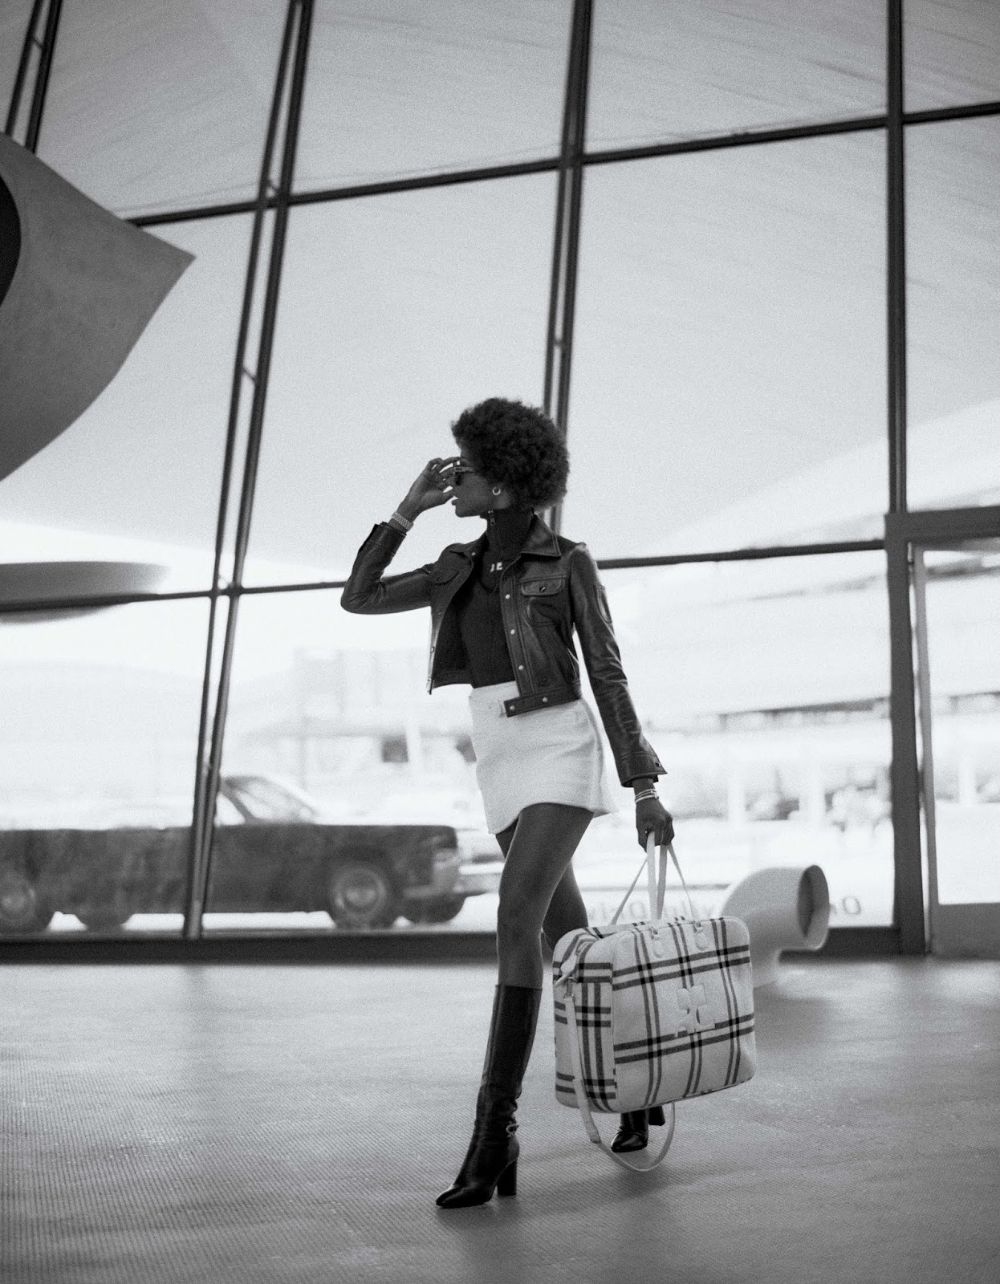 Express Lane: Mayowa Nicholas by Chris Colls for Elle Magazine September 2021. Clothing & Accessories: Jacket, vest, skirt, belt, tote by Courreges / Gianvito Rossi Black Hynde 85 leather knee-high boots / Sunglasses by Dior / Earrings, bracelets by Tiffany & Co.; Watch by Rolex